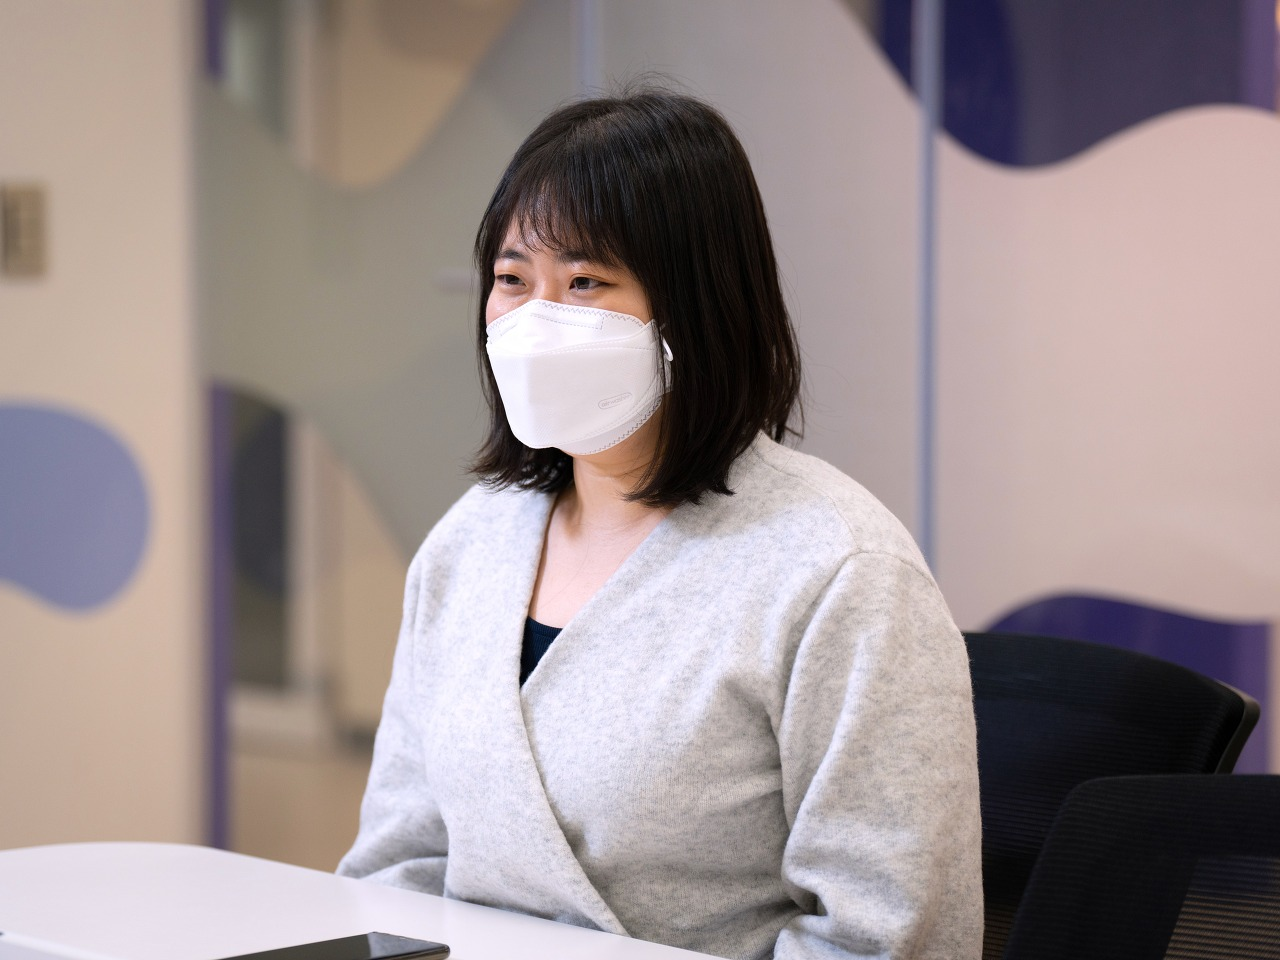 If it weren't for Elice, would I have gotten a job? - Park Jiyoon, Frontend Developer at Nexon